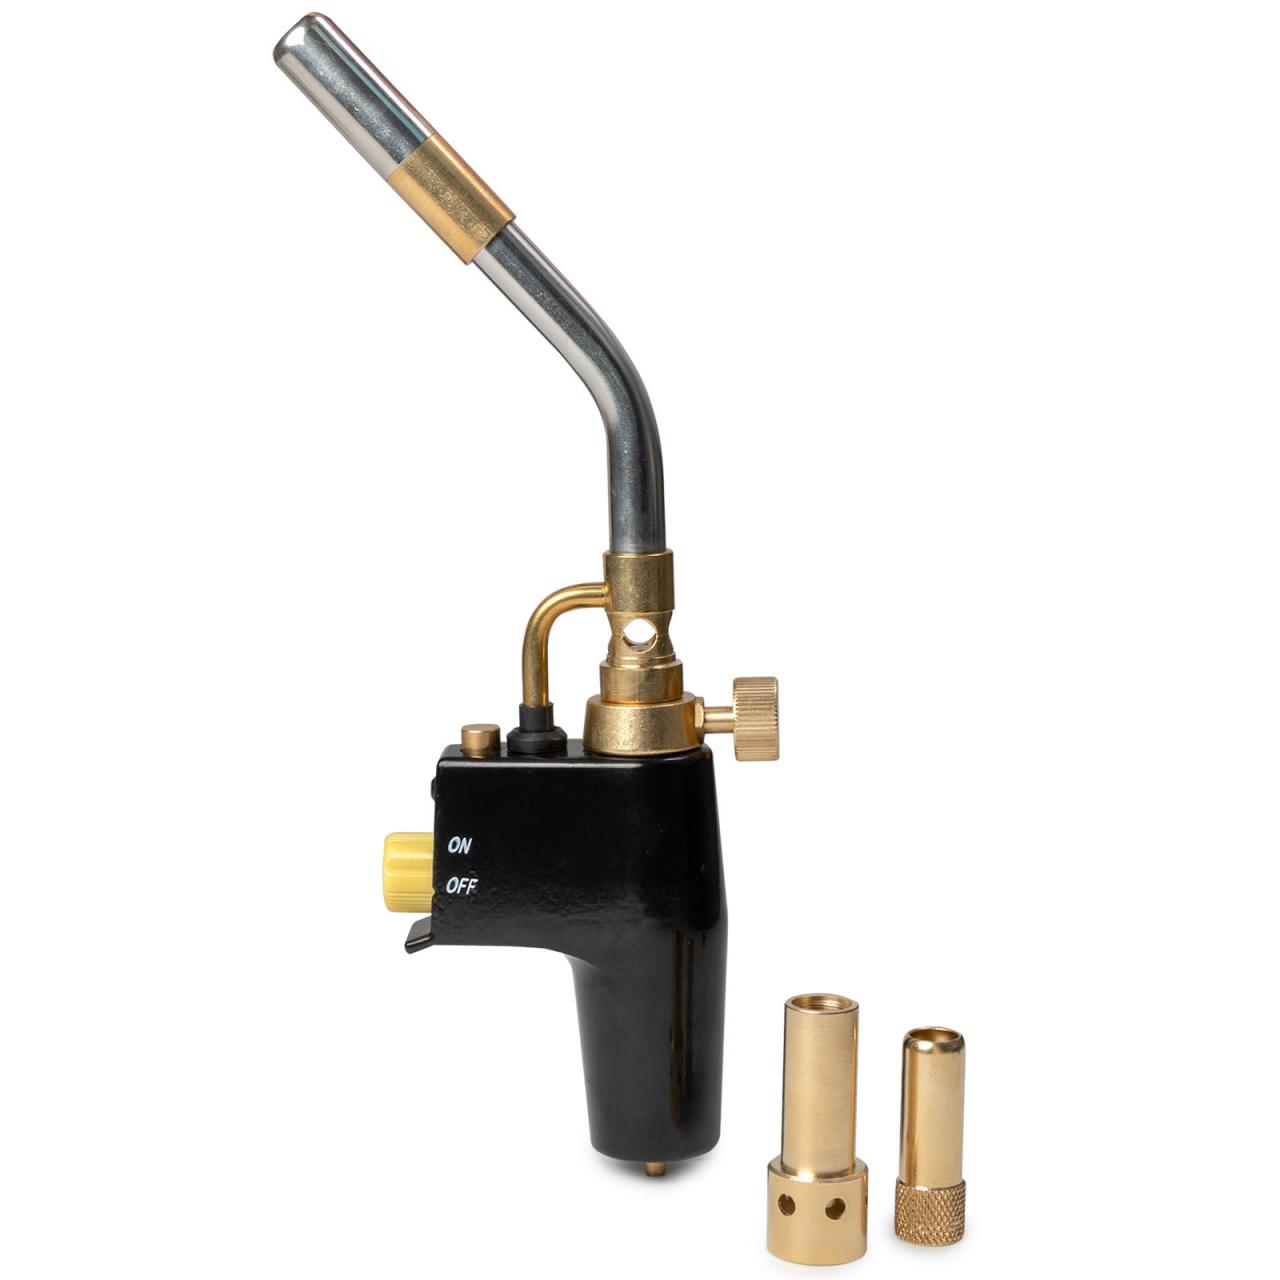 SÜA MAPP or Propane Hose Hand Torch Industrial Power & Hand Tools co  Welding & Soldering